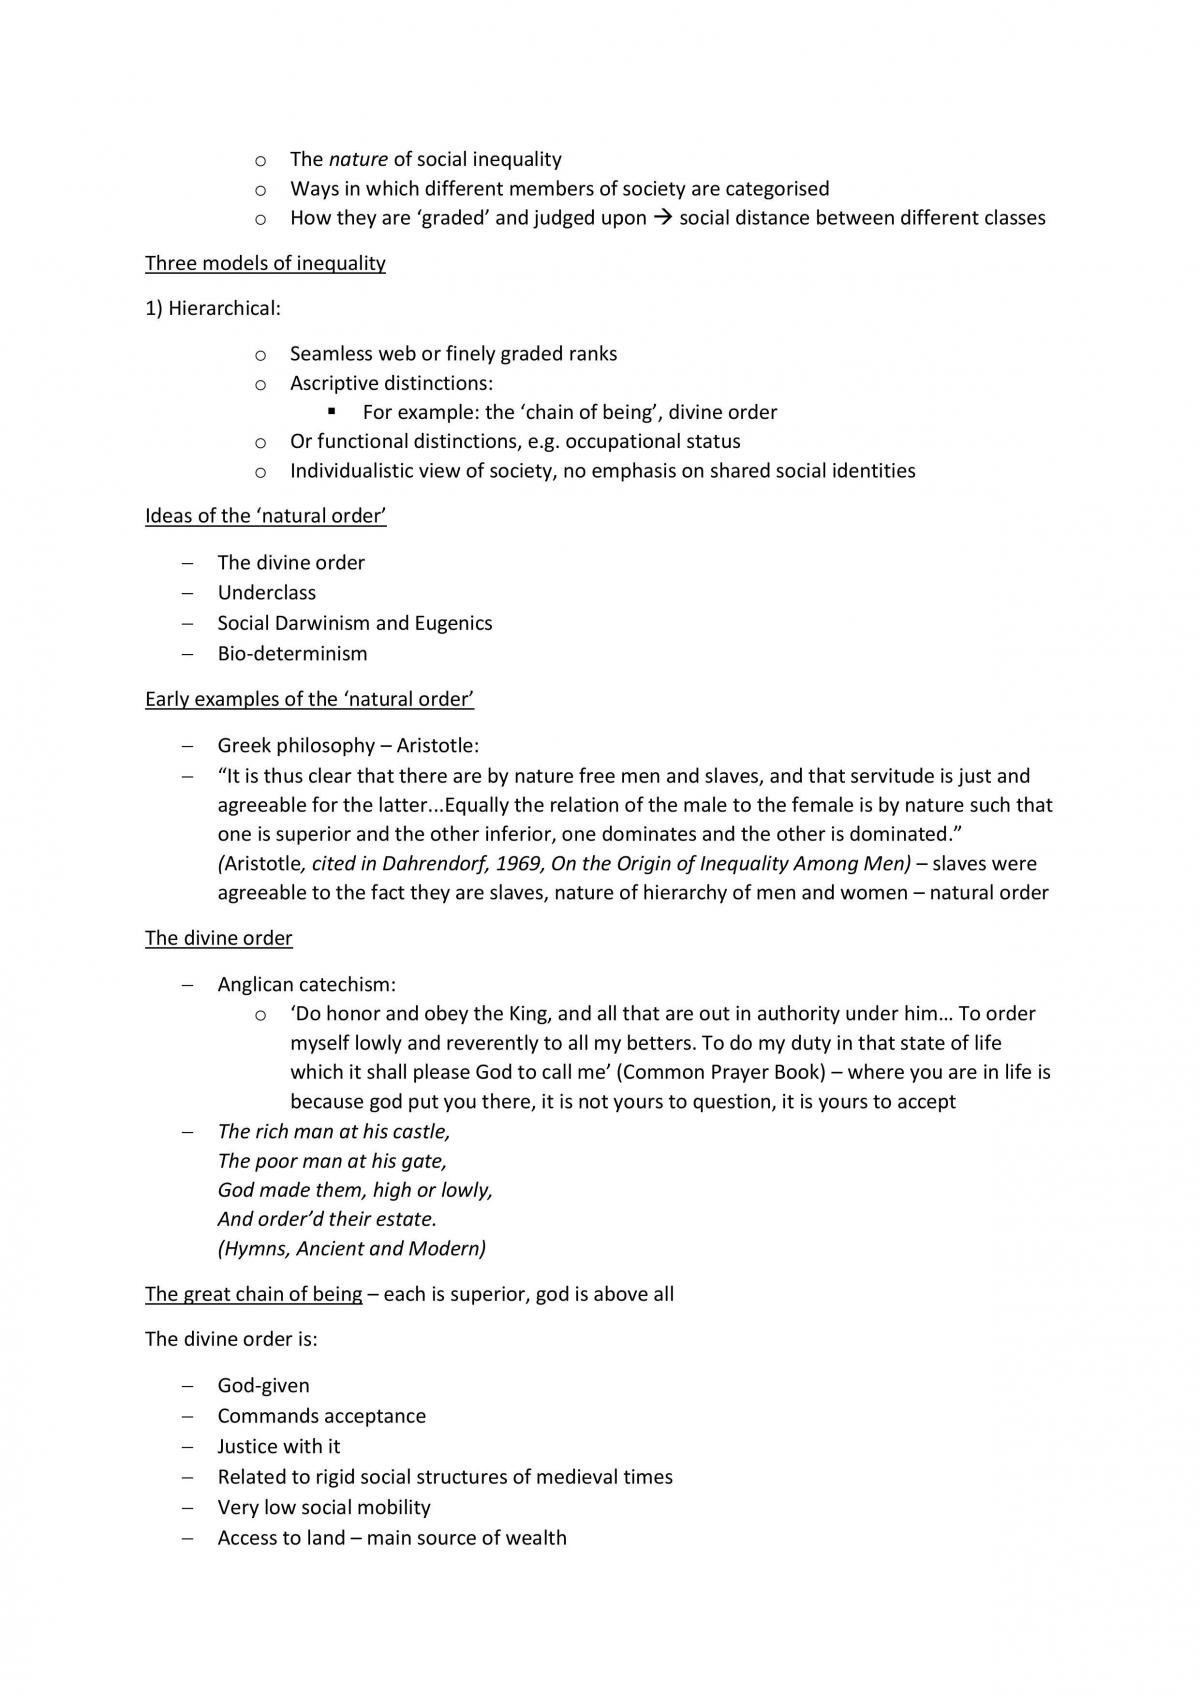 Class Structure and Social Inequality full notes - Page 3